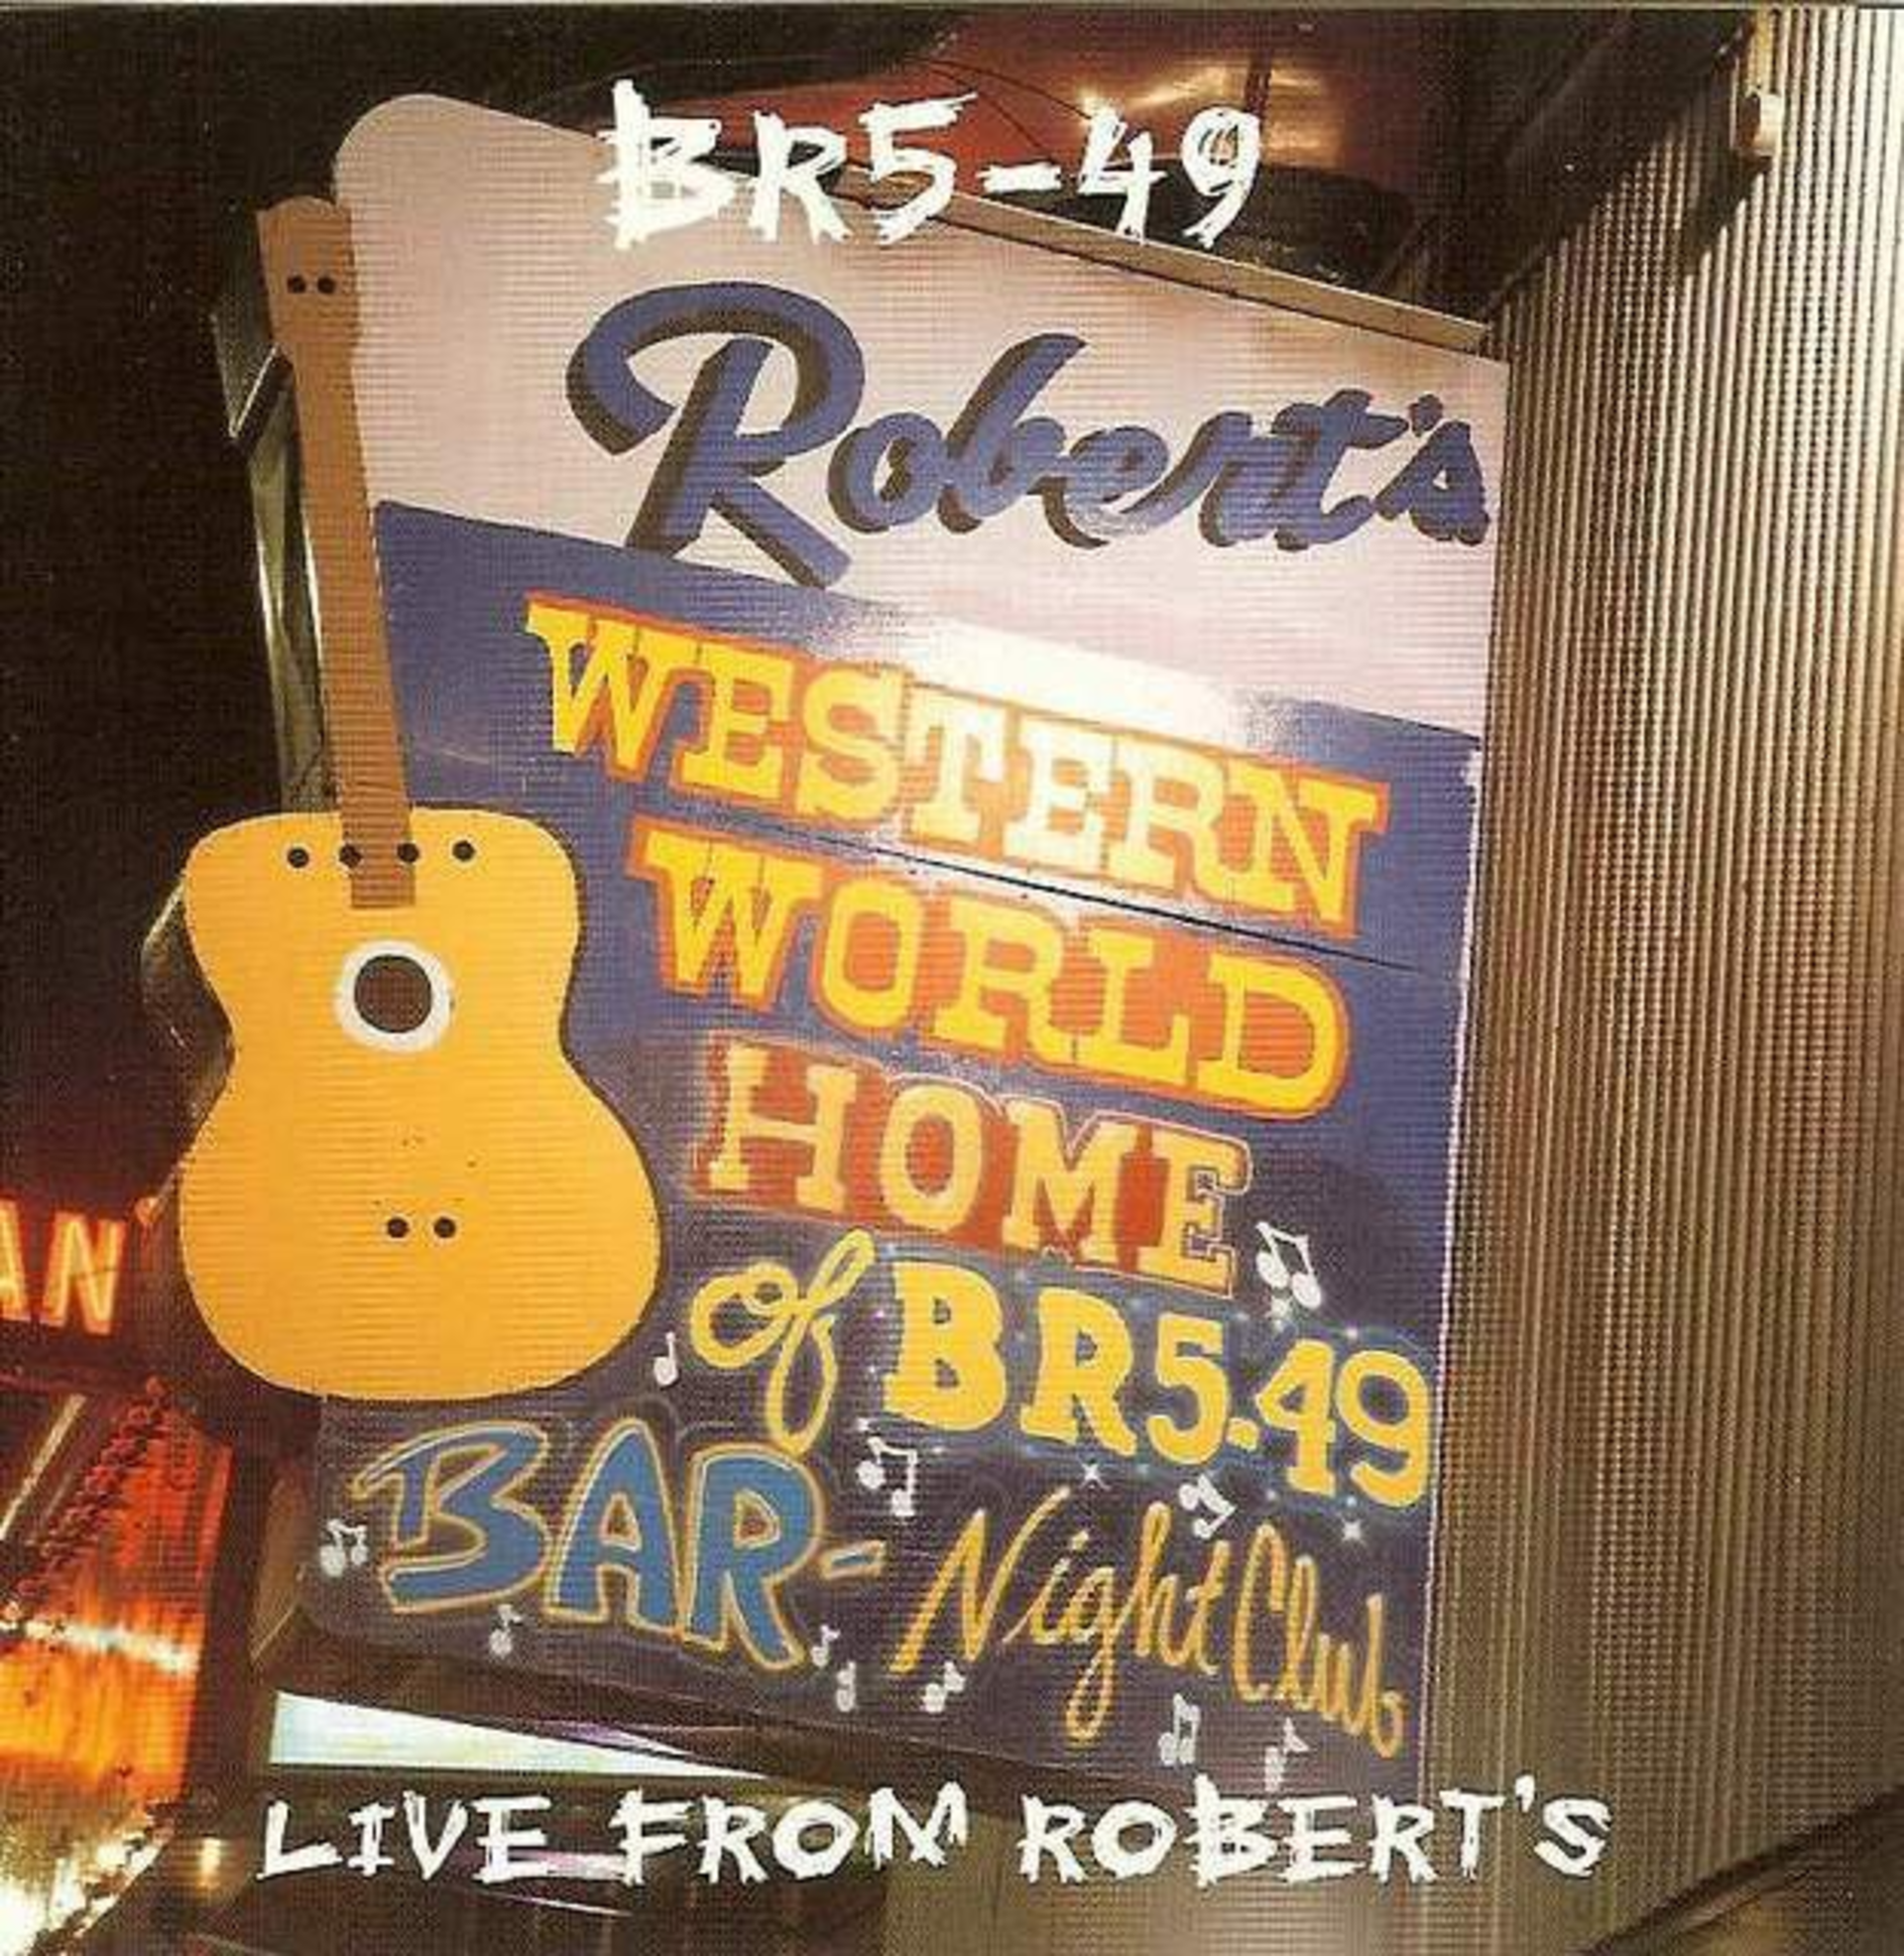 Throwback MP3 of the Week: BR5-49, 